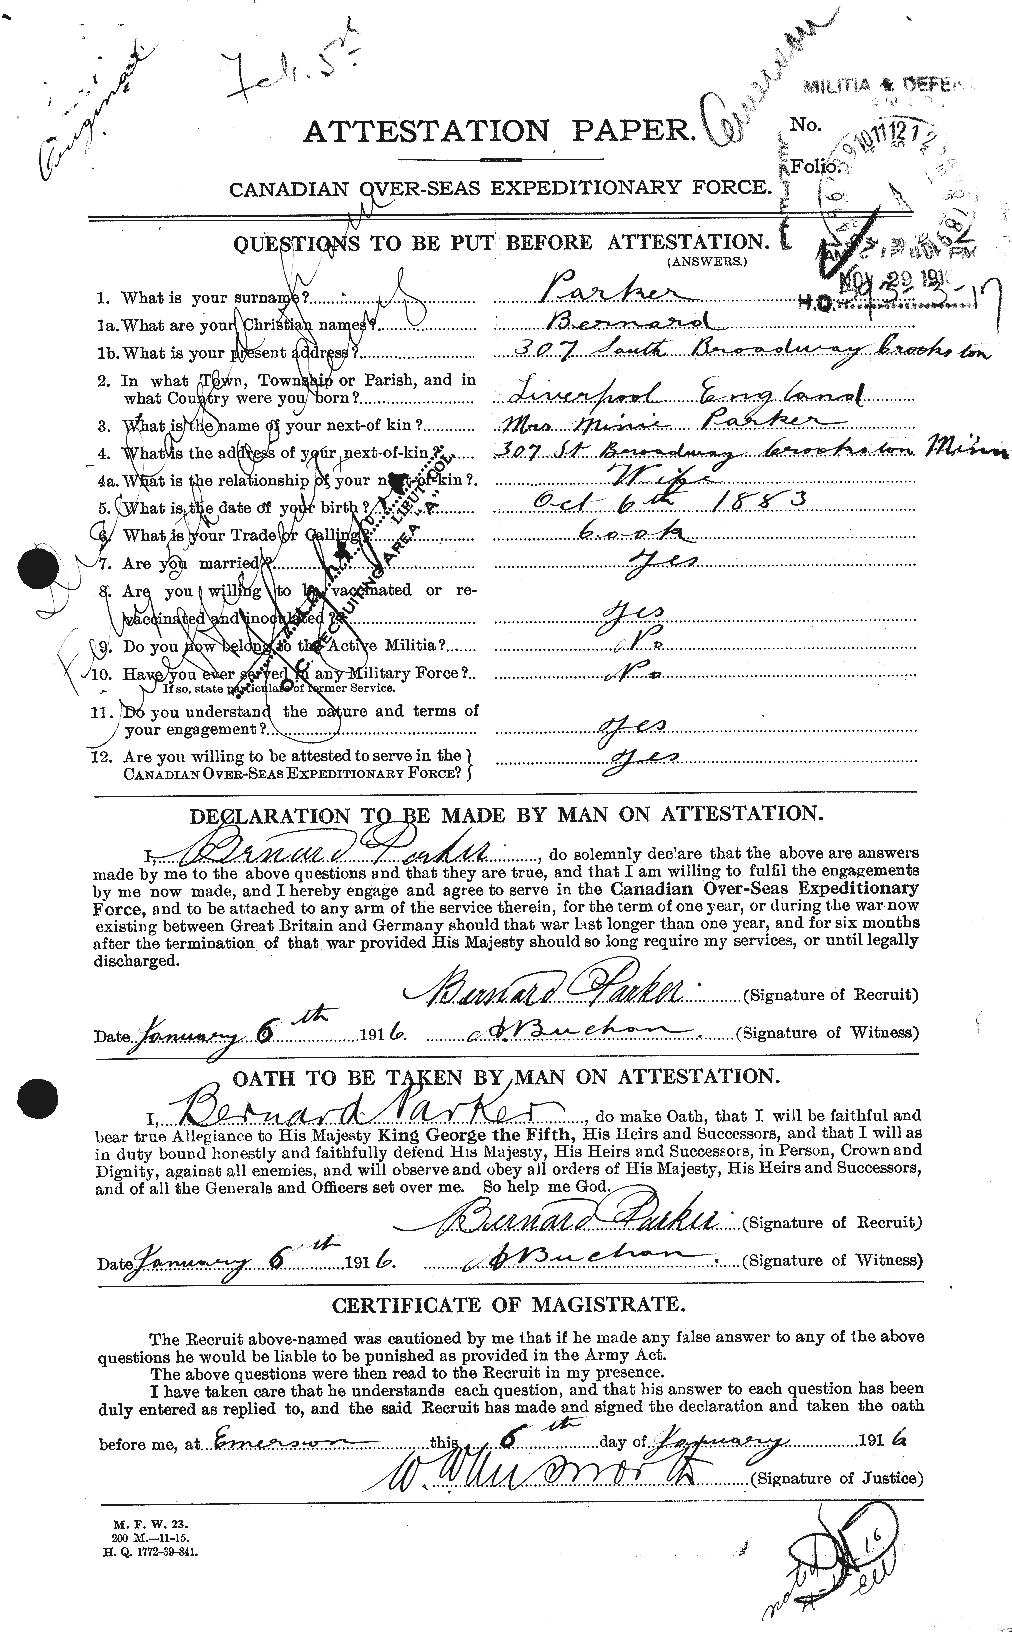 Personnel Records of the First World War - CEF 565040a